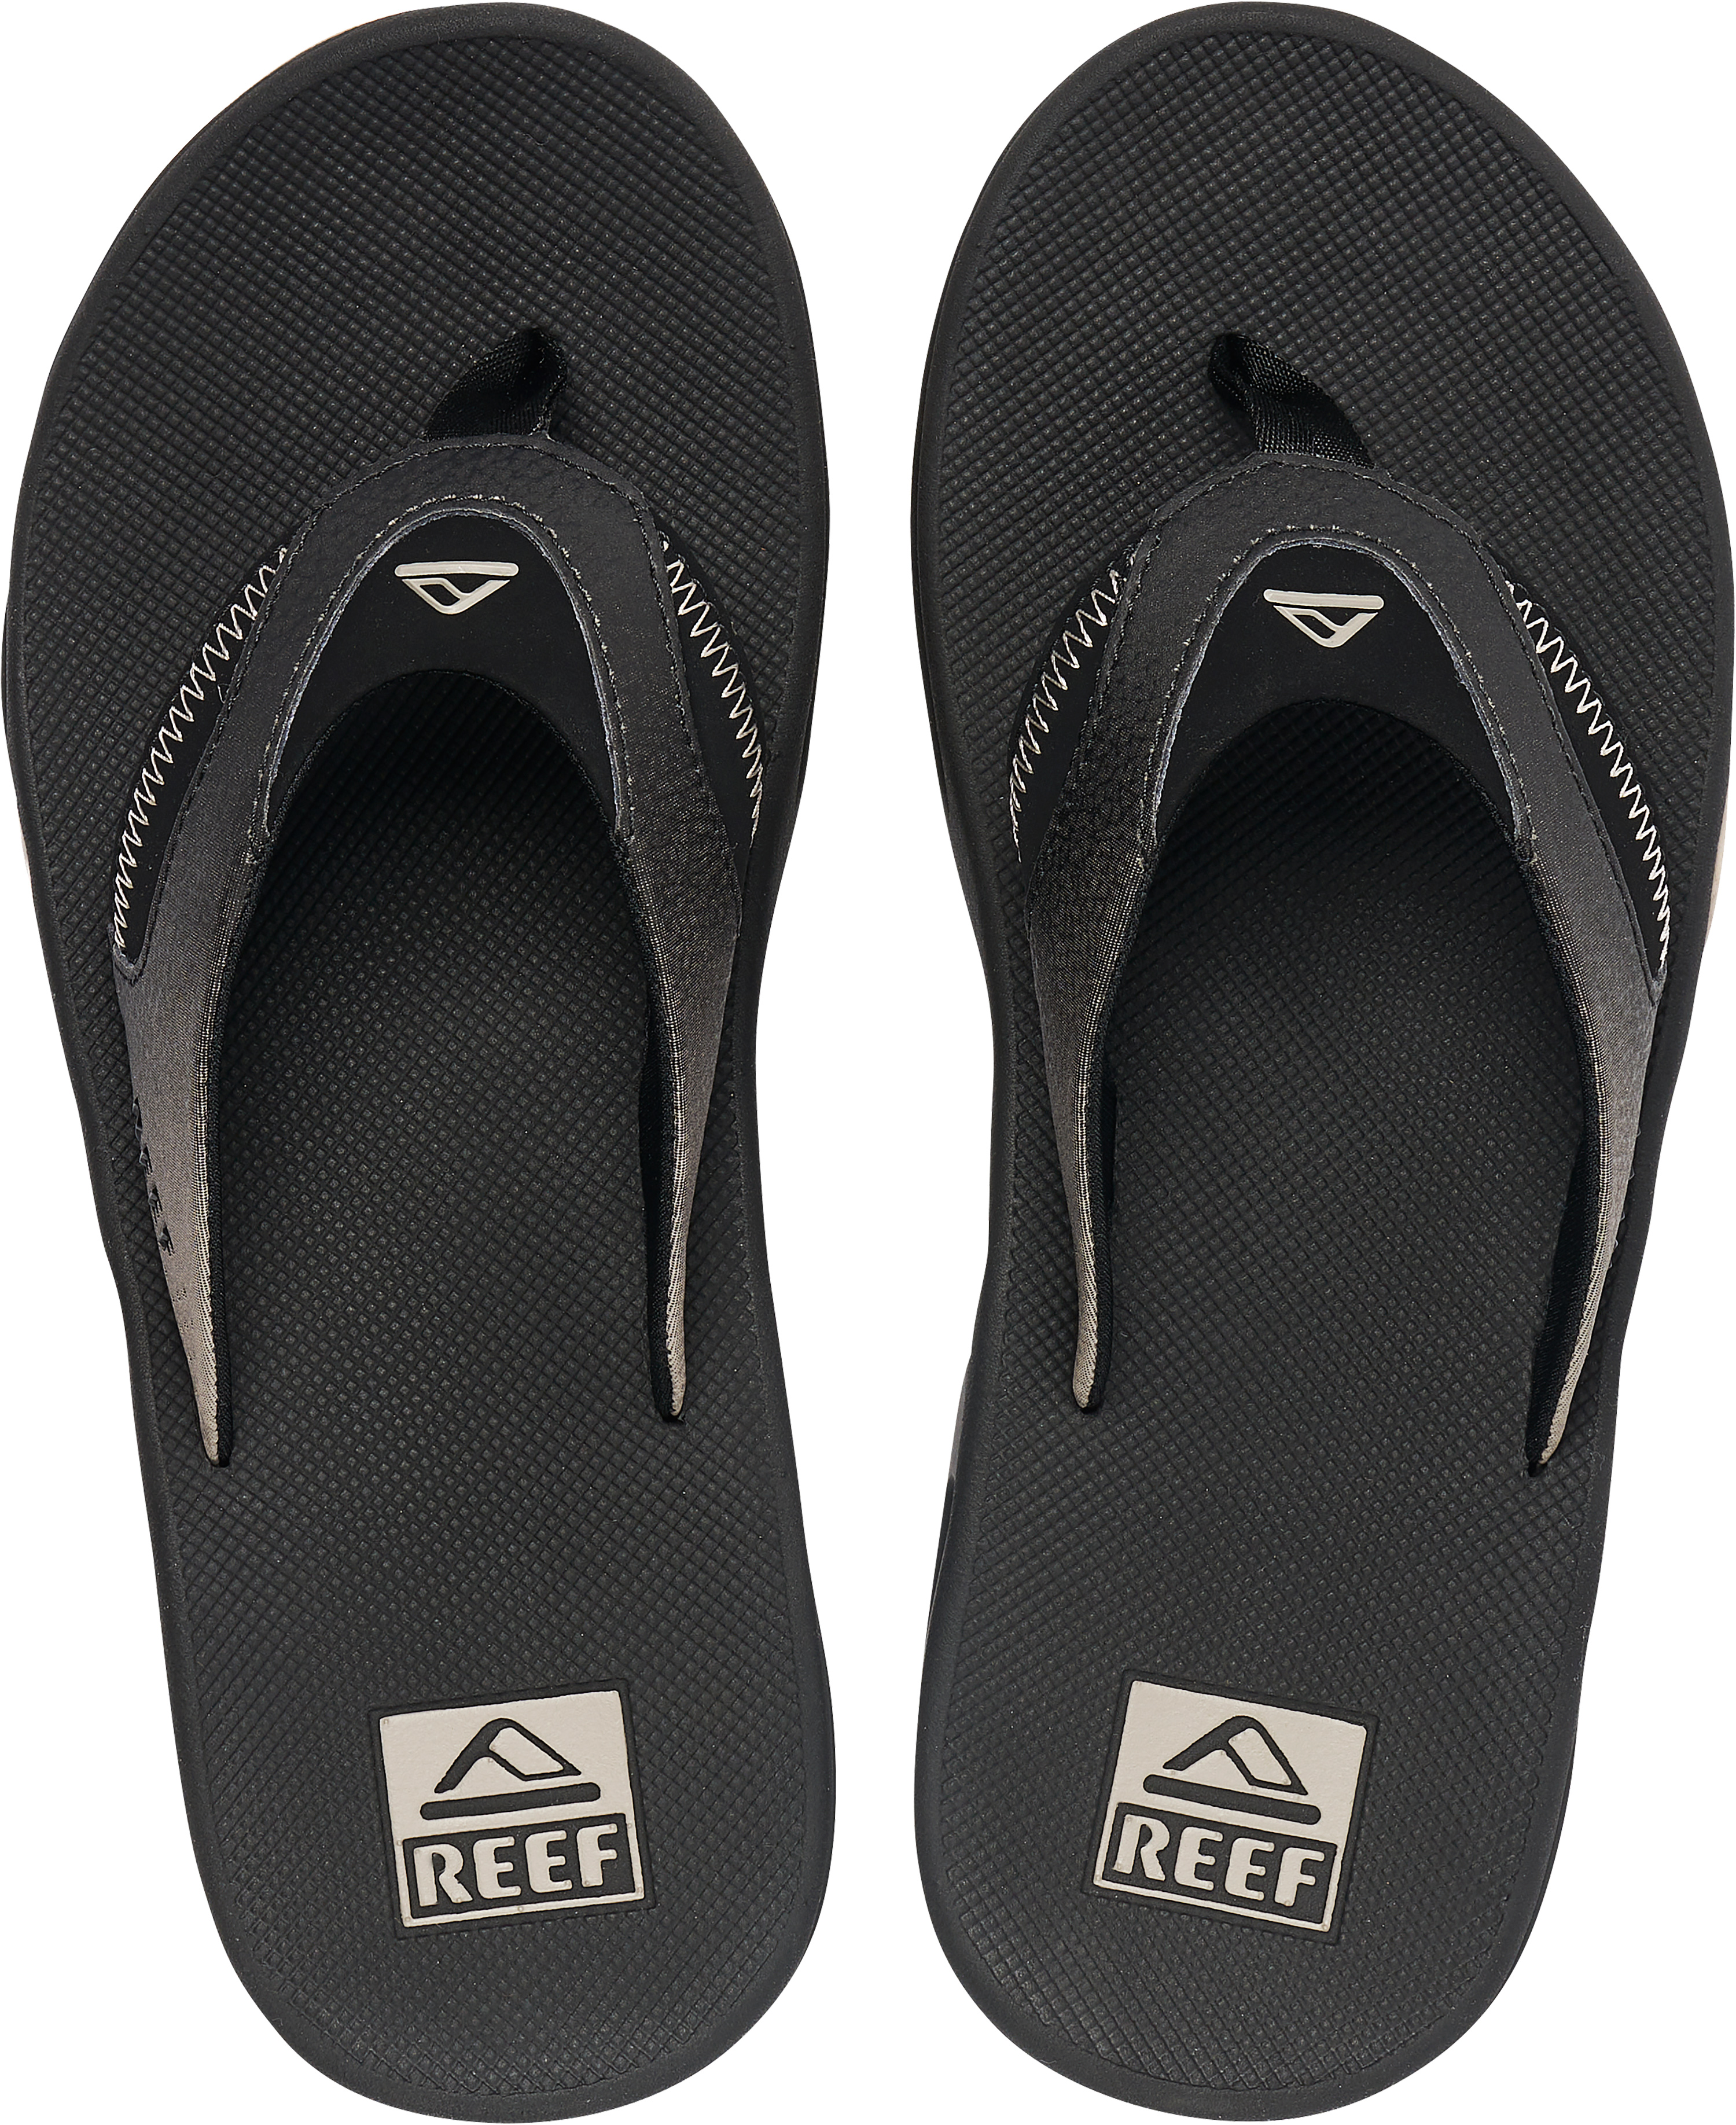 Reef Black/Taupe Fade Fanning size 10